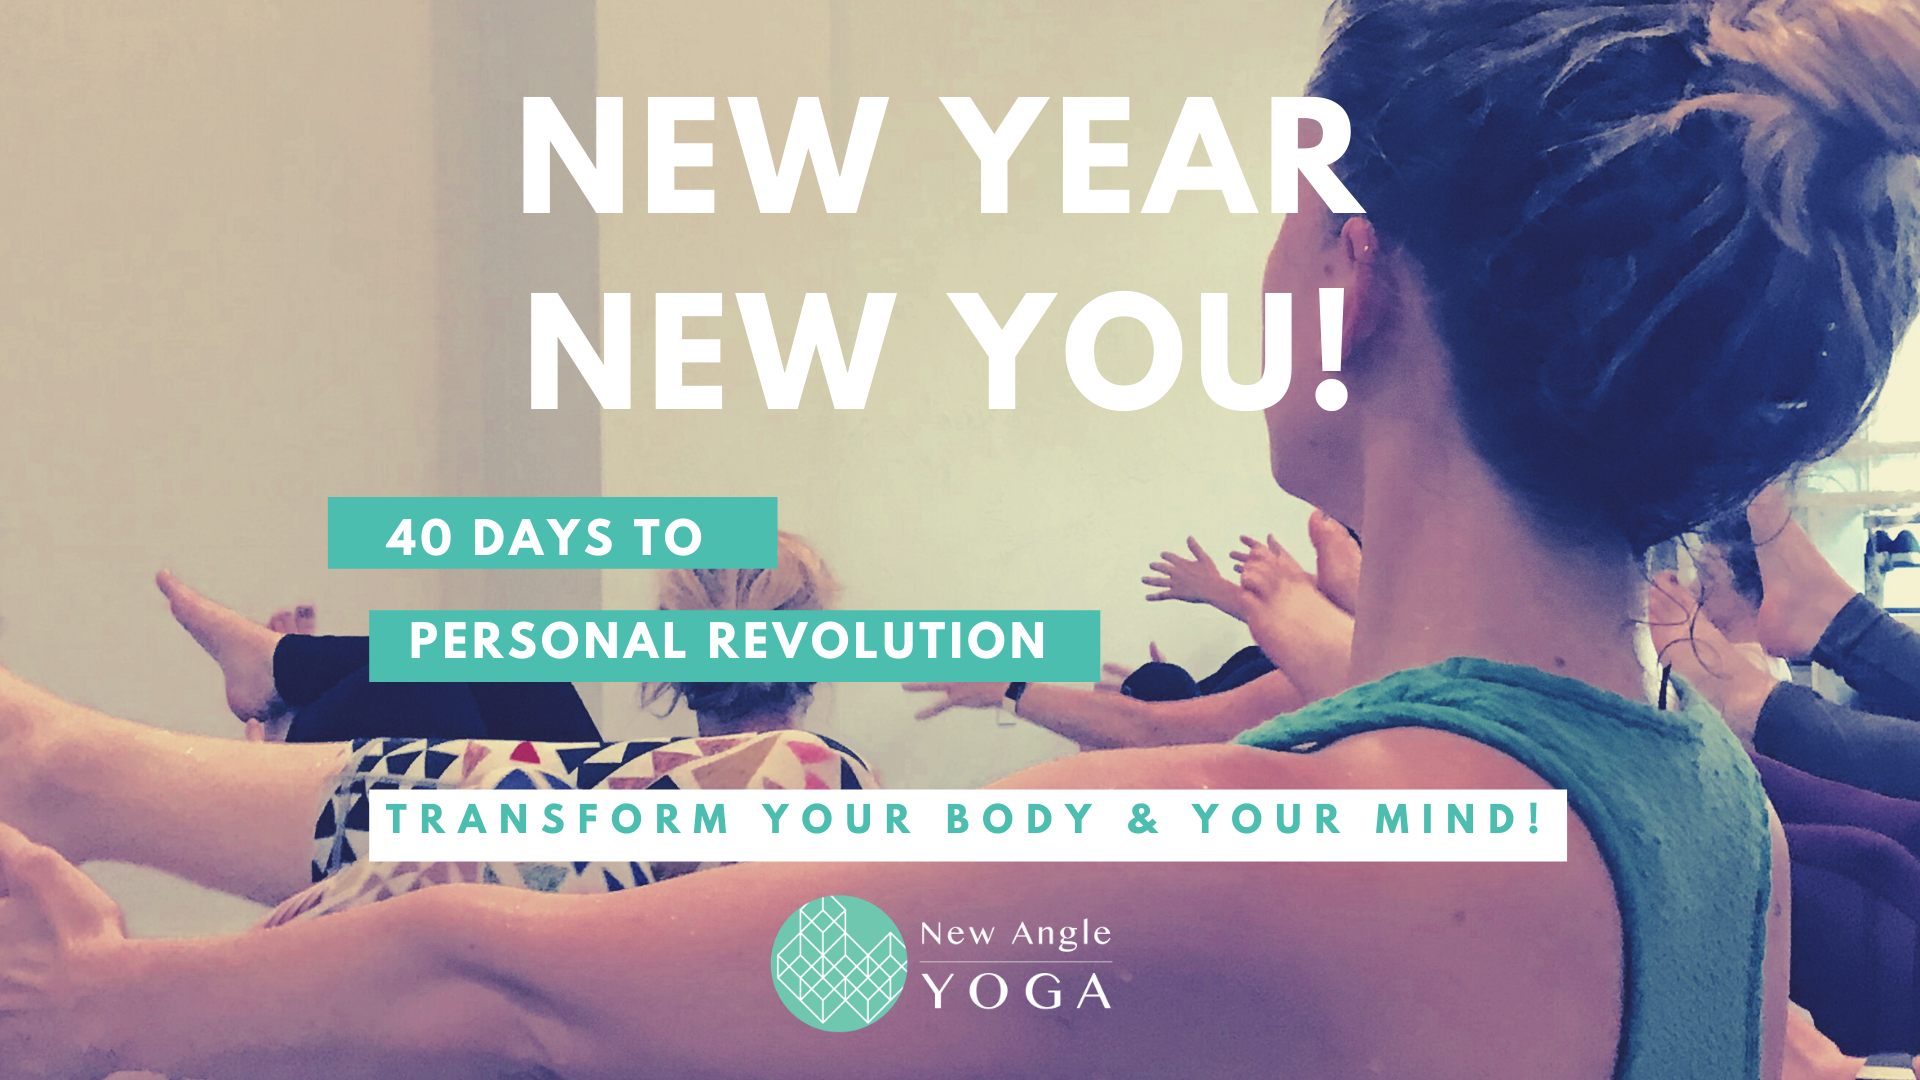 40 Days to Personal Revolution - Not Your Ordinary Yoga Challenge